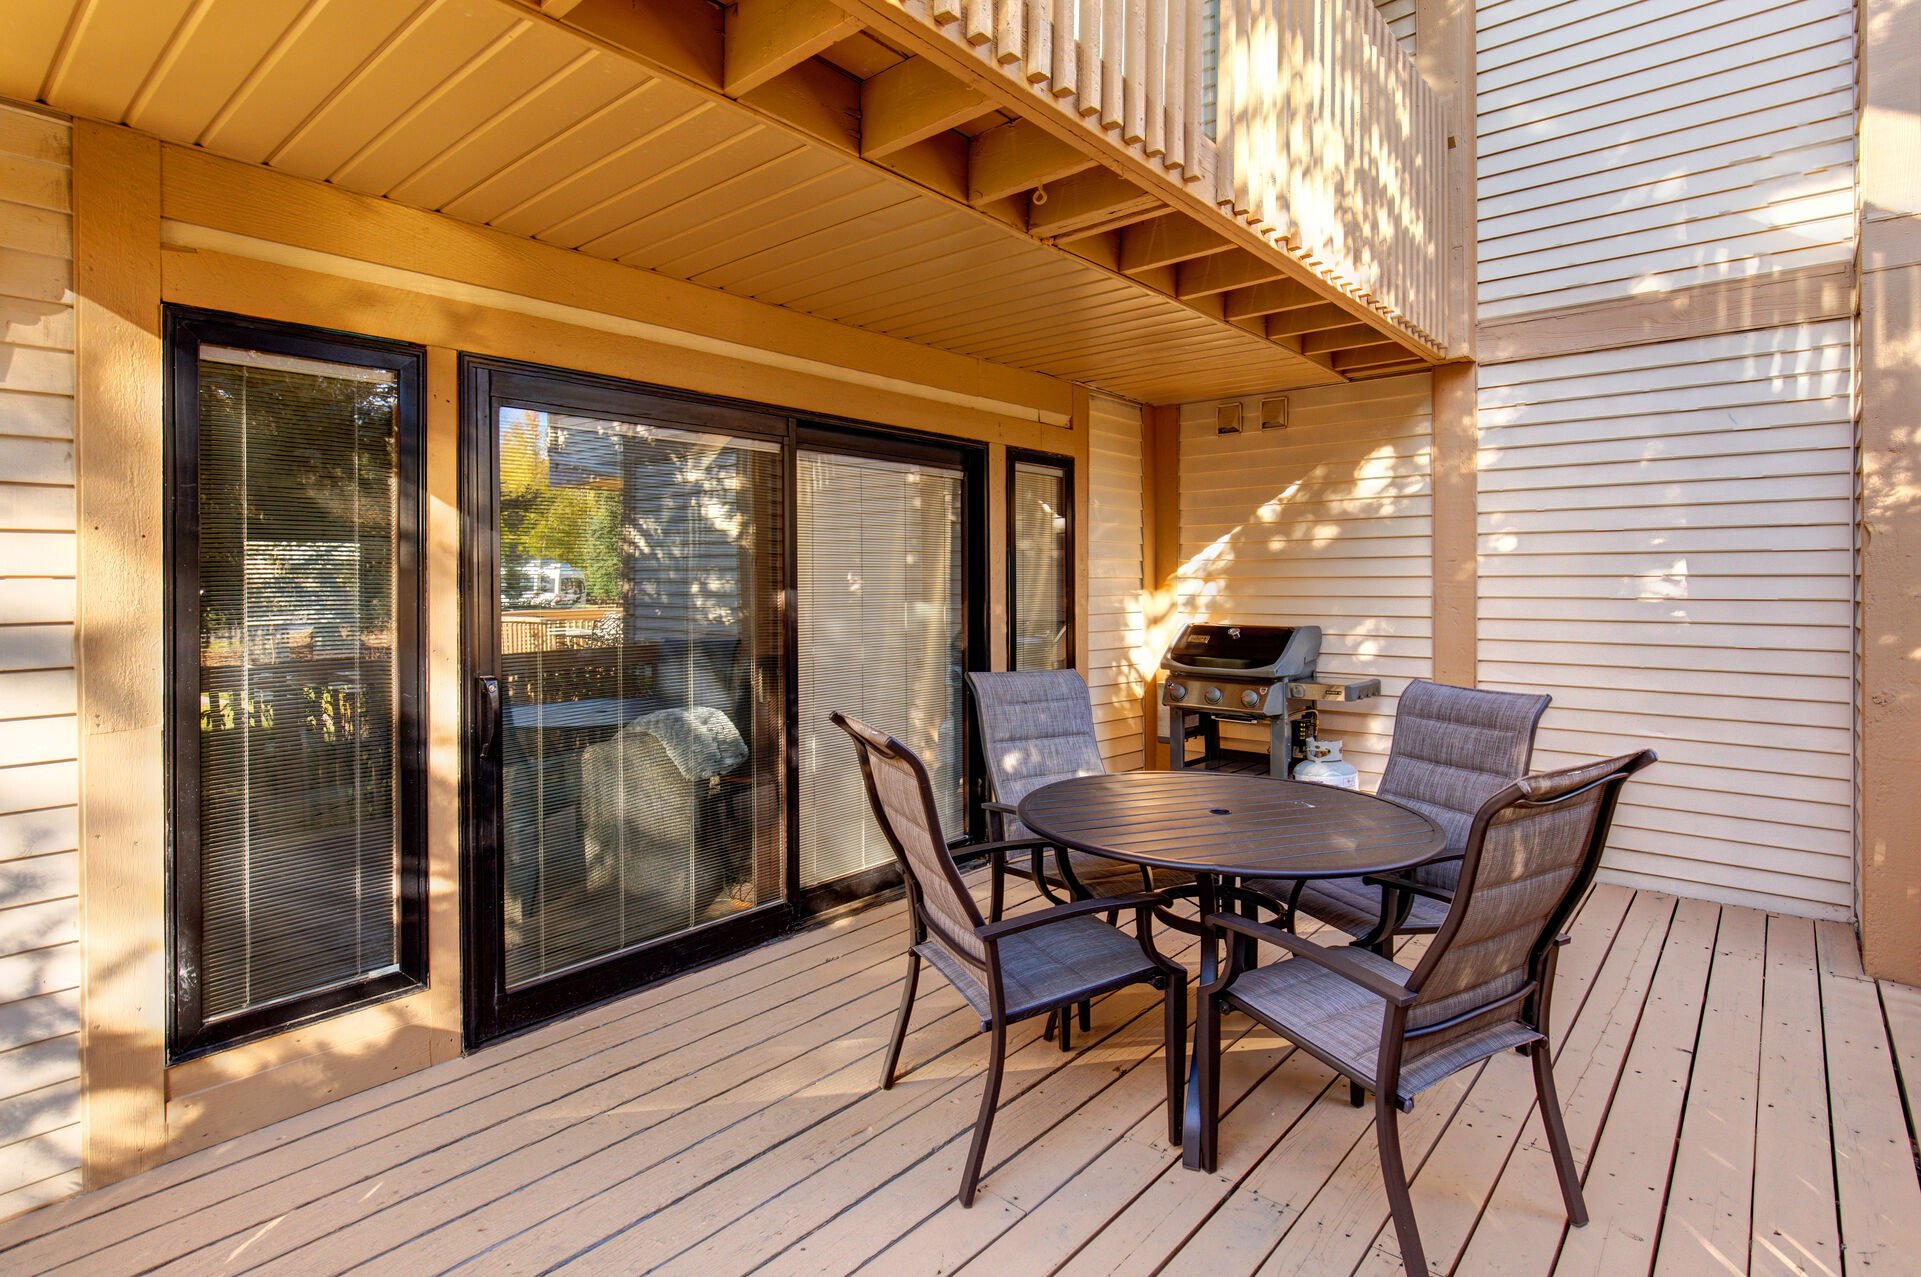 Private Deck with Seating for four and Propane BBQ